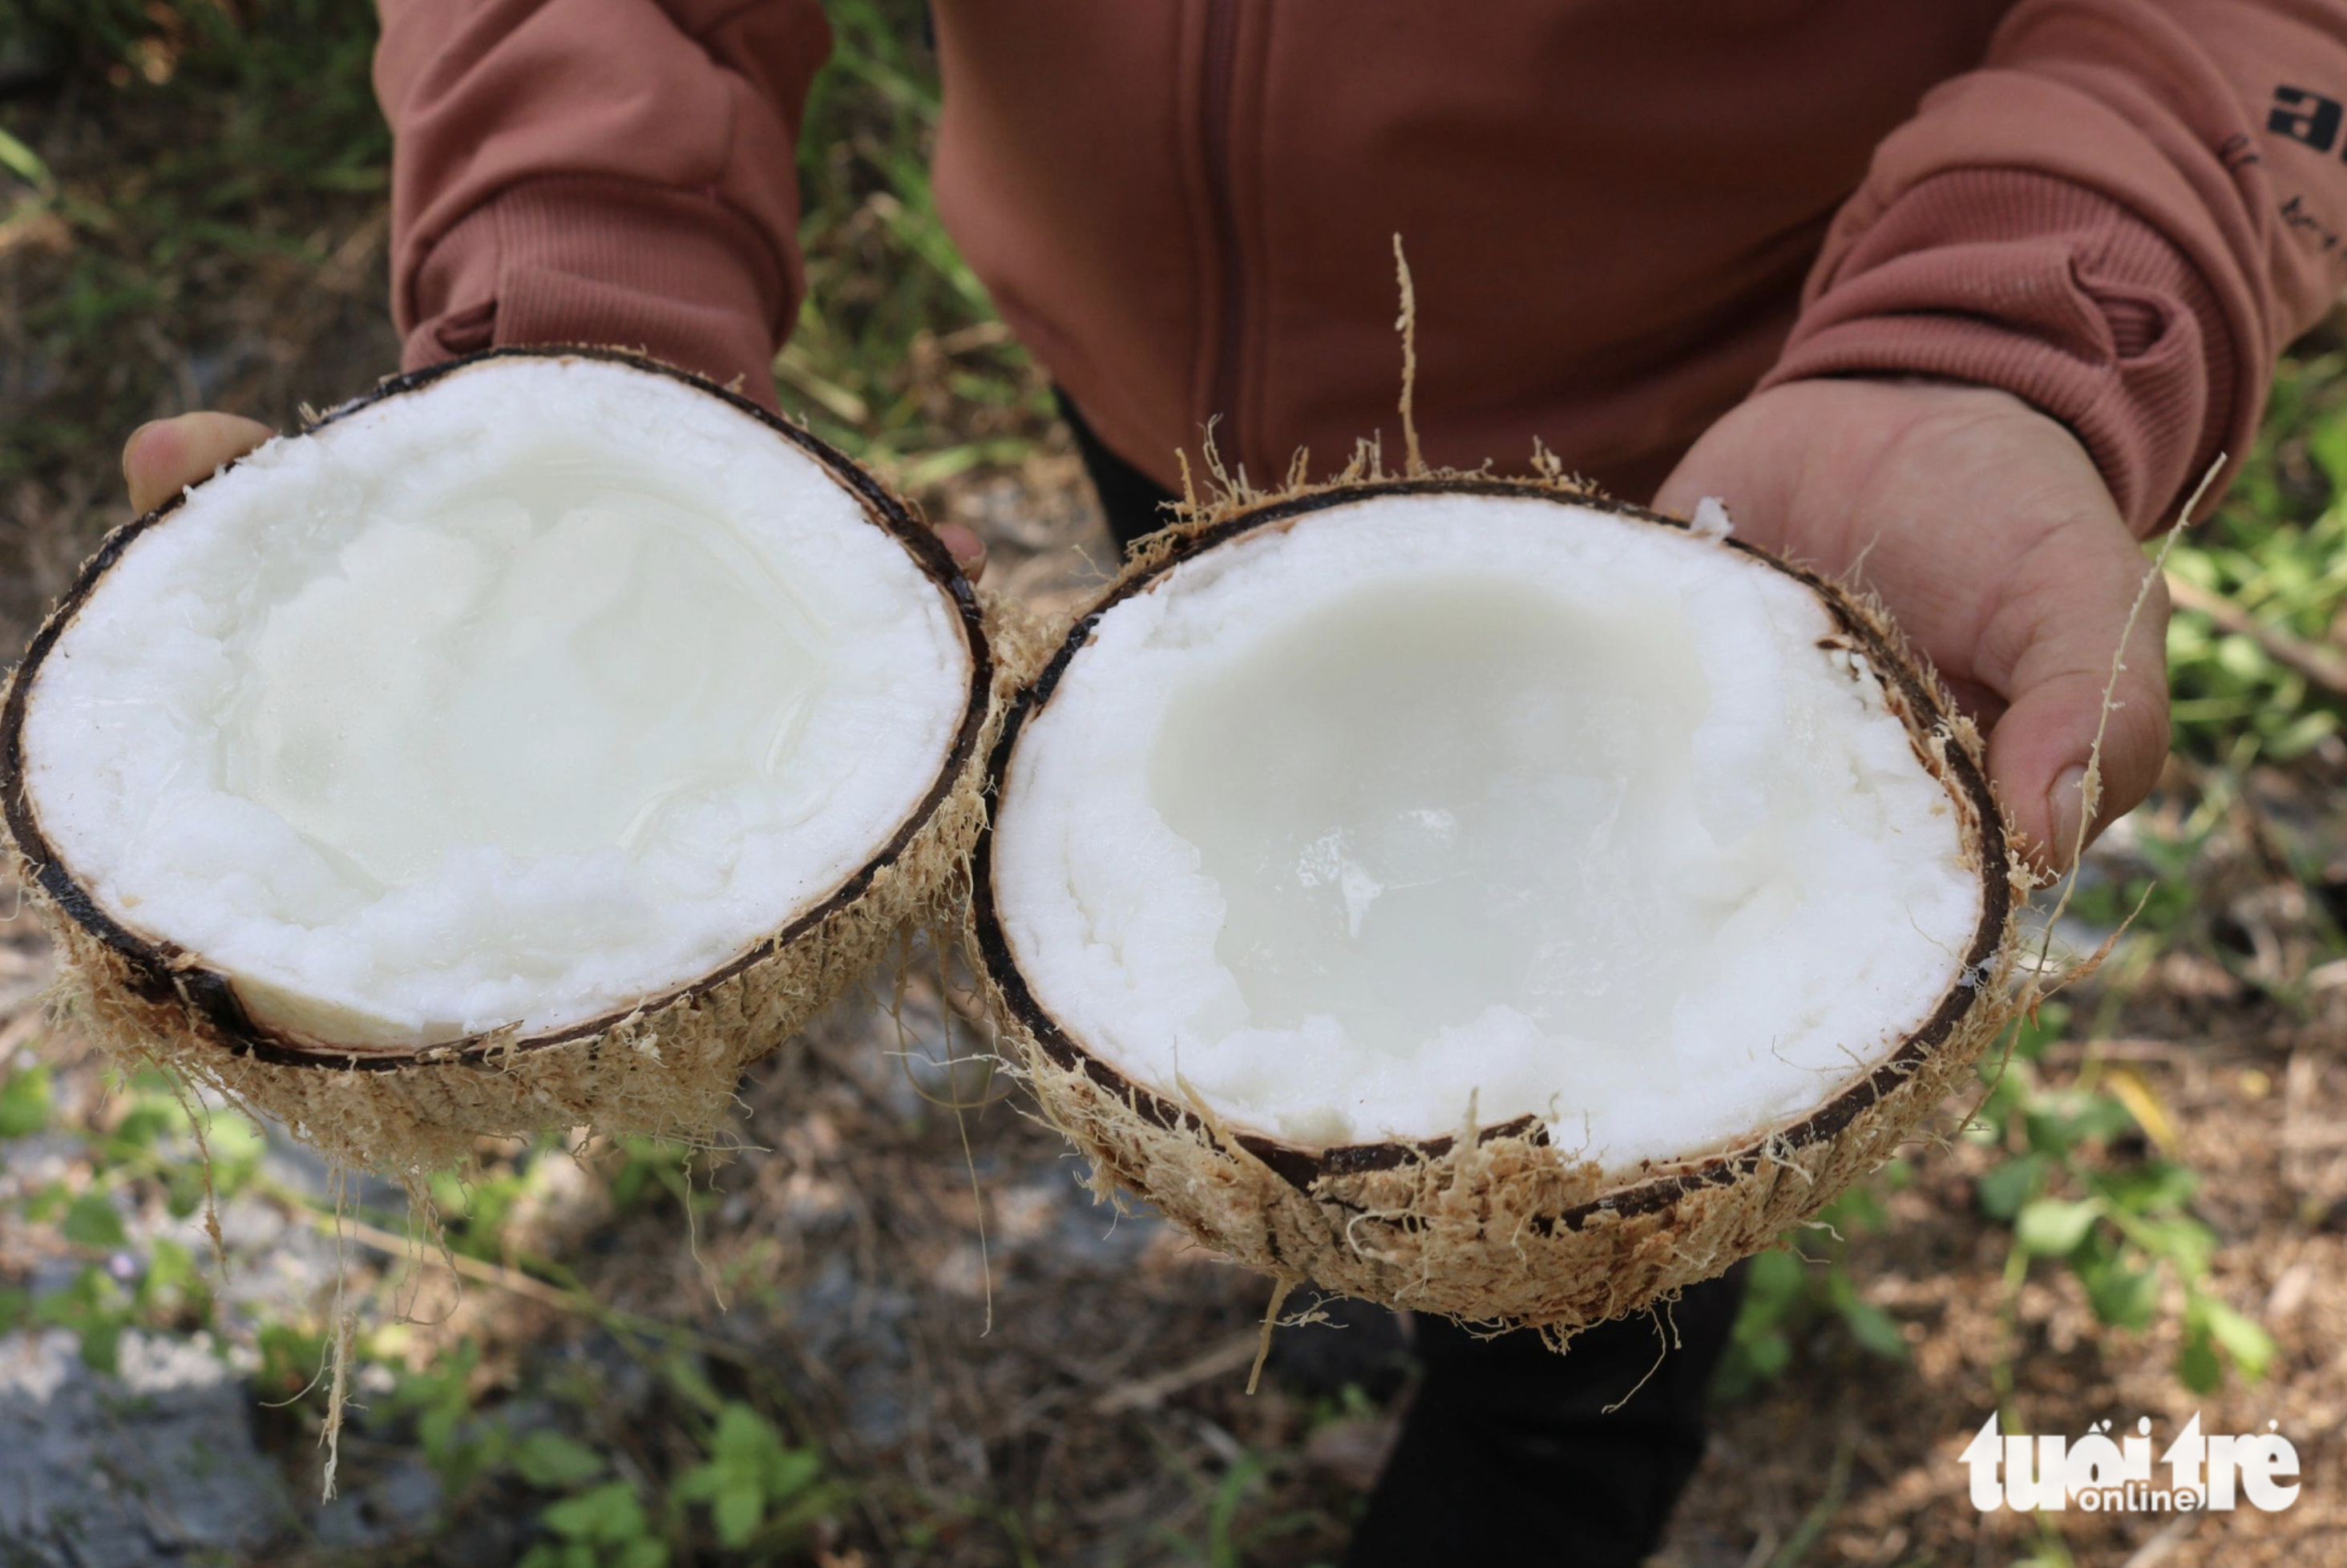 Tra Vinh Province, southern Vietnam is known for dua sap (waxy flesh coconut). Photo: Hoai Thuong / Tuoi Tre